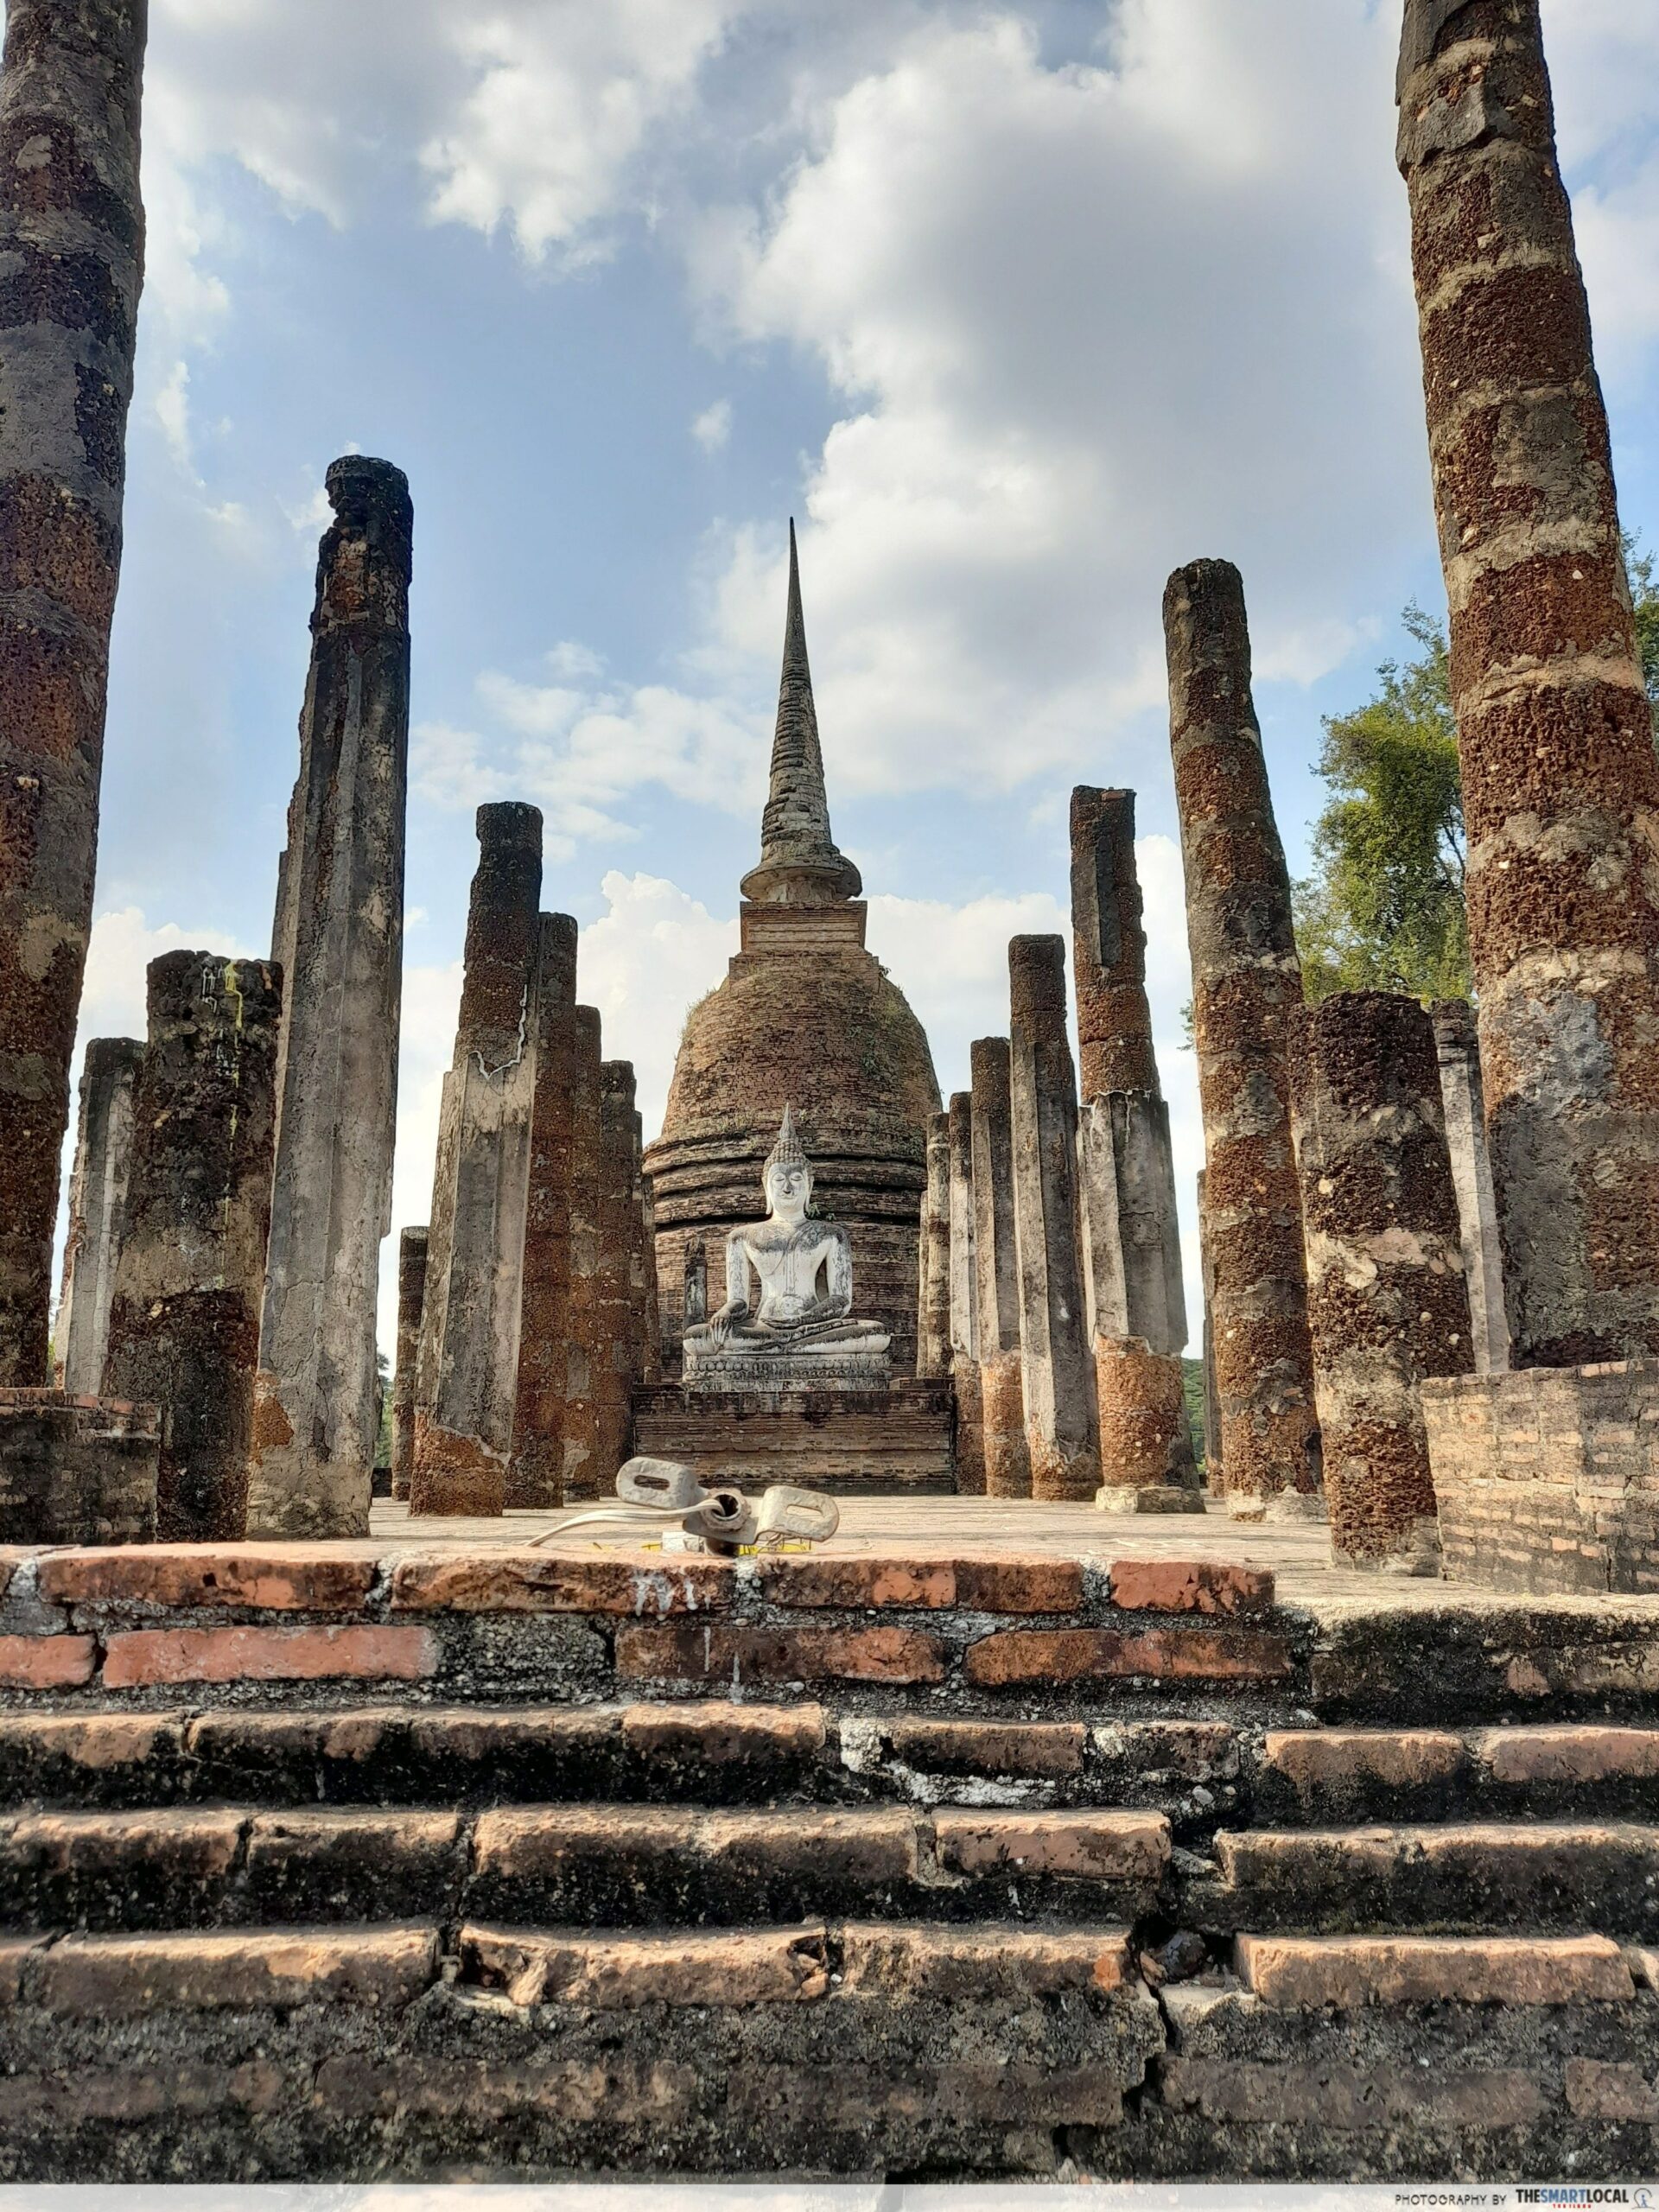 8 historical parks in Thailand - old temples